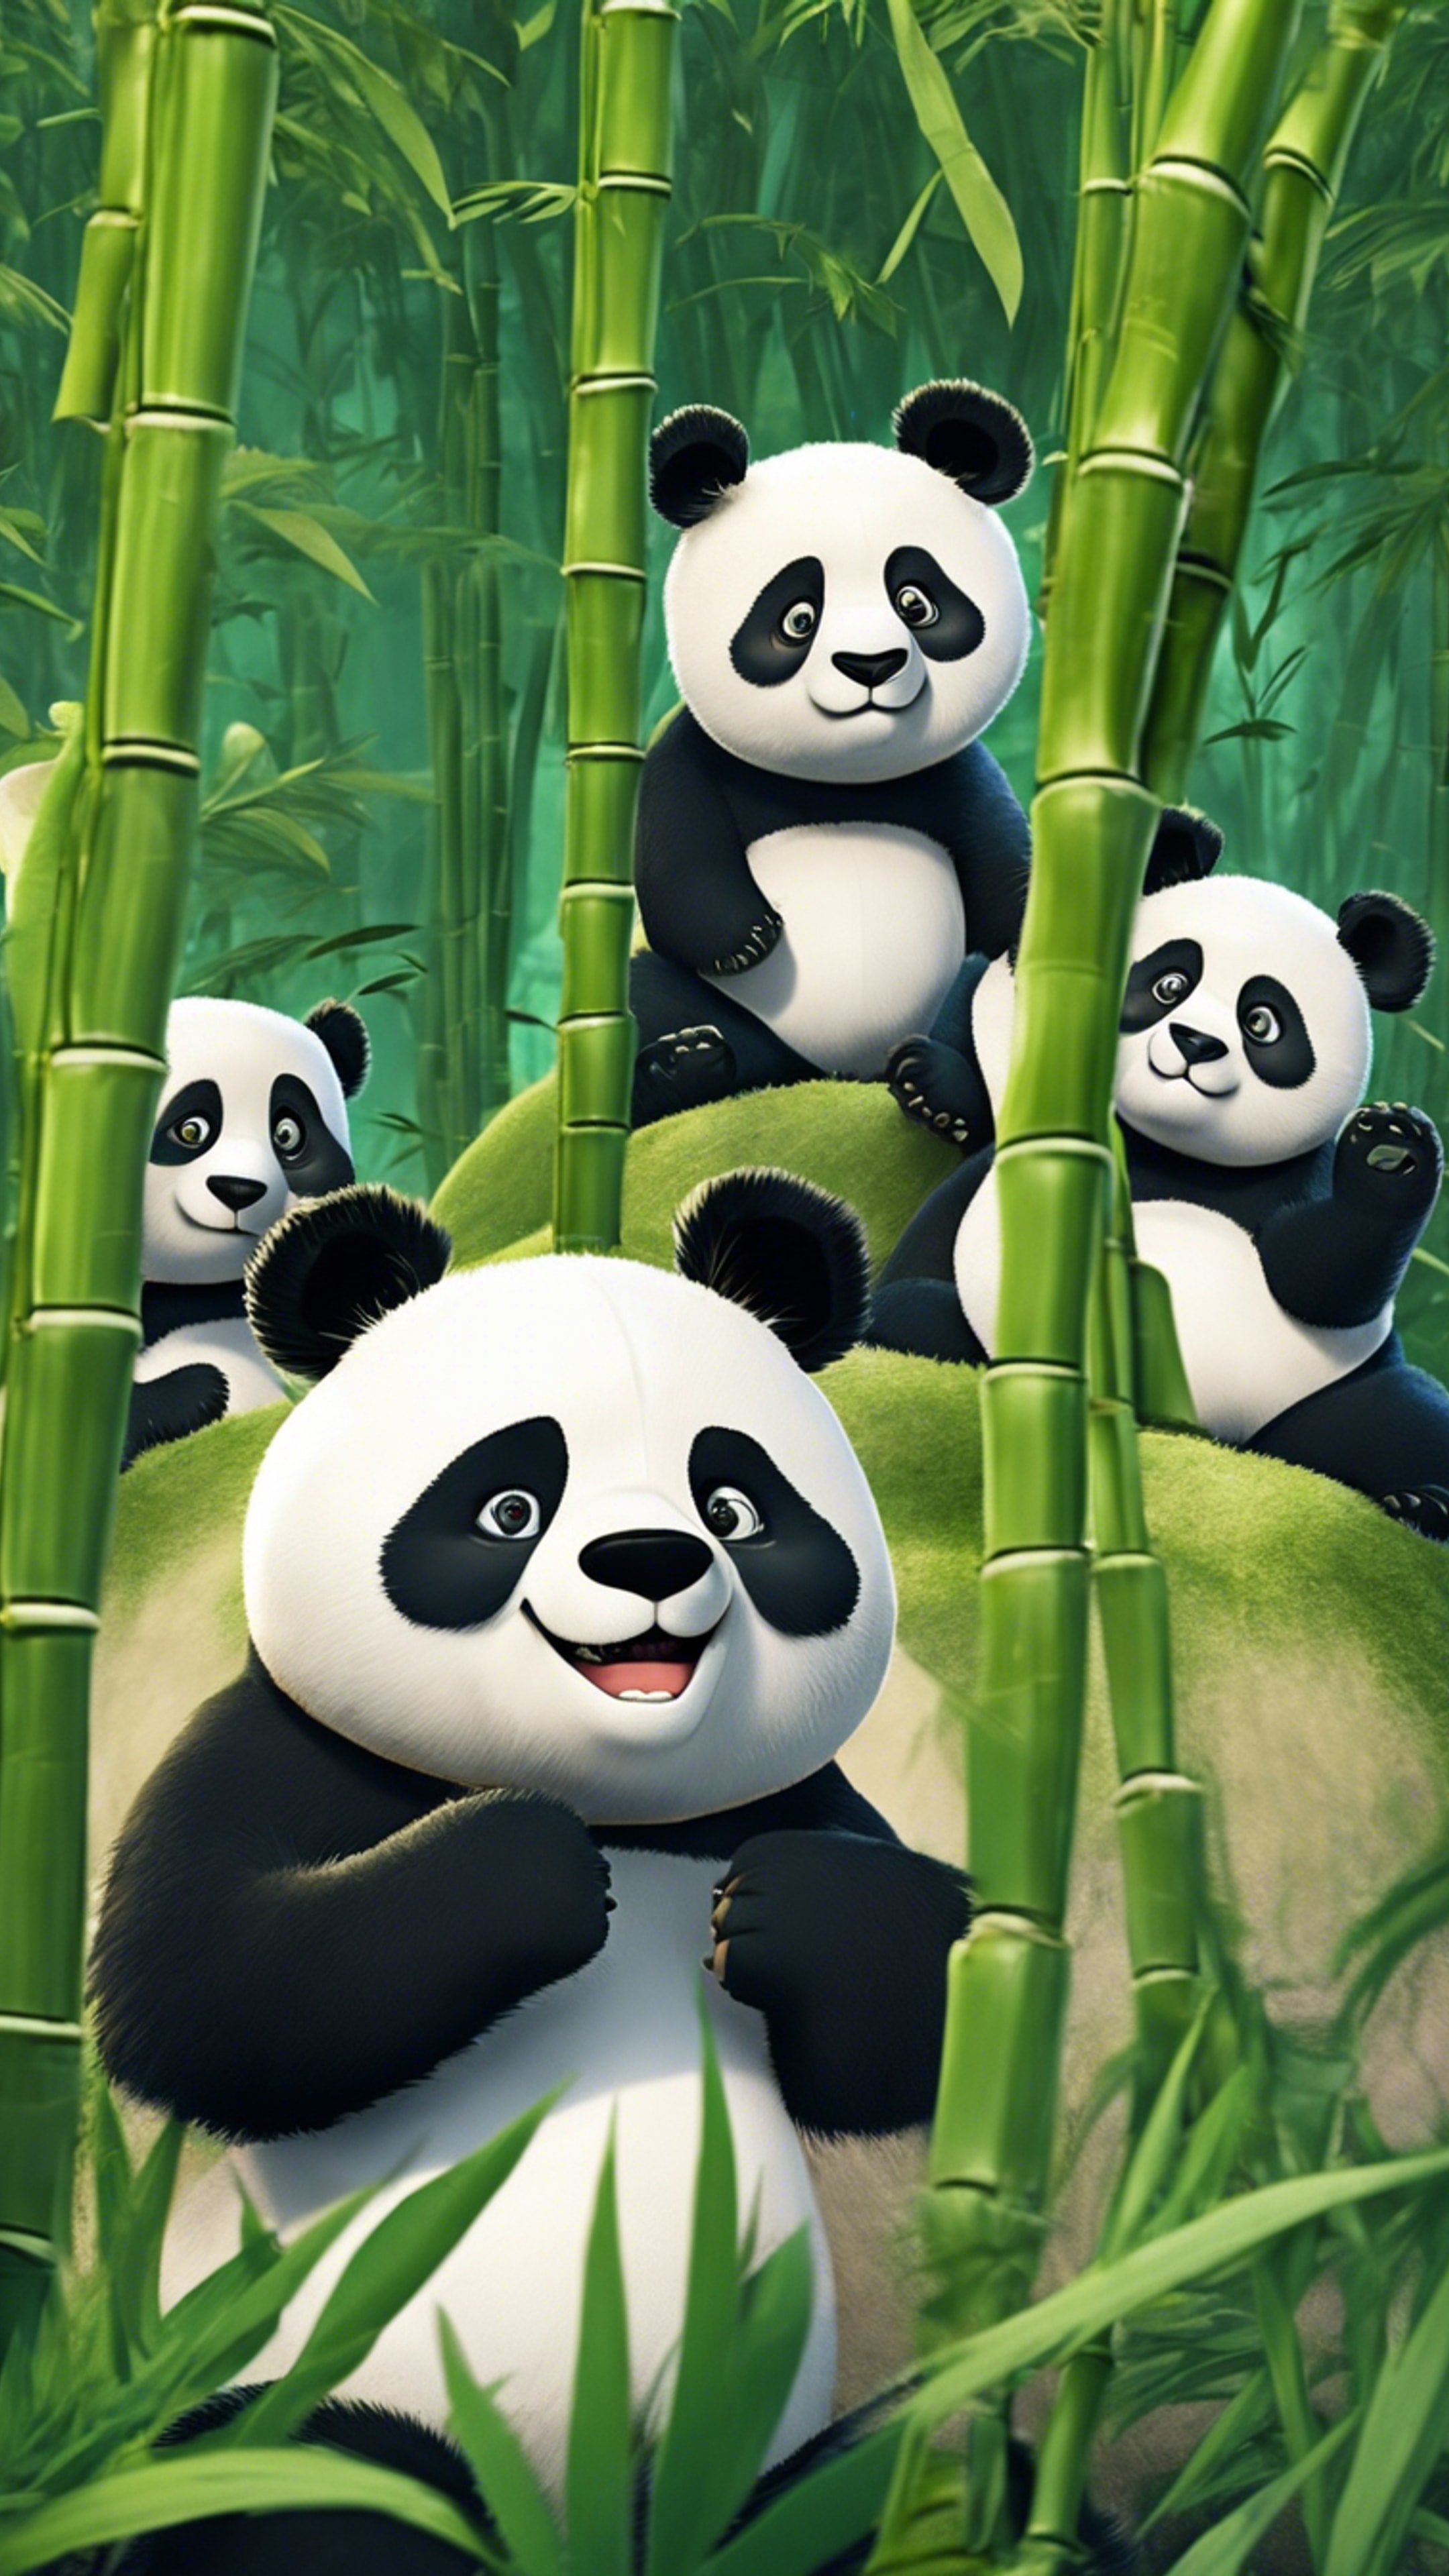 A group of fluffy cartoon pandas playing hide and seek in green bamboo forest.壁紙[63bcd8976f104e0d843a]